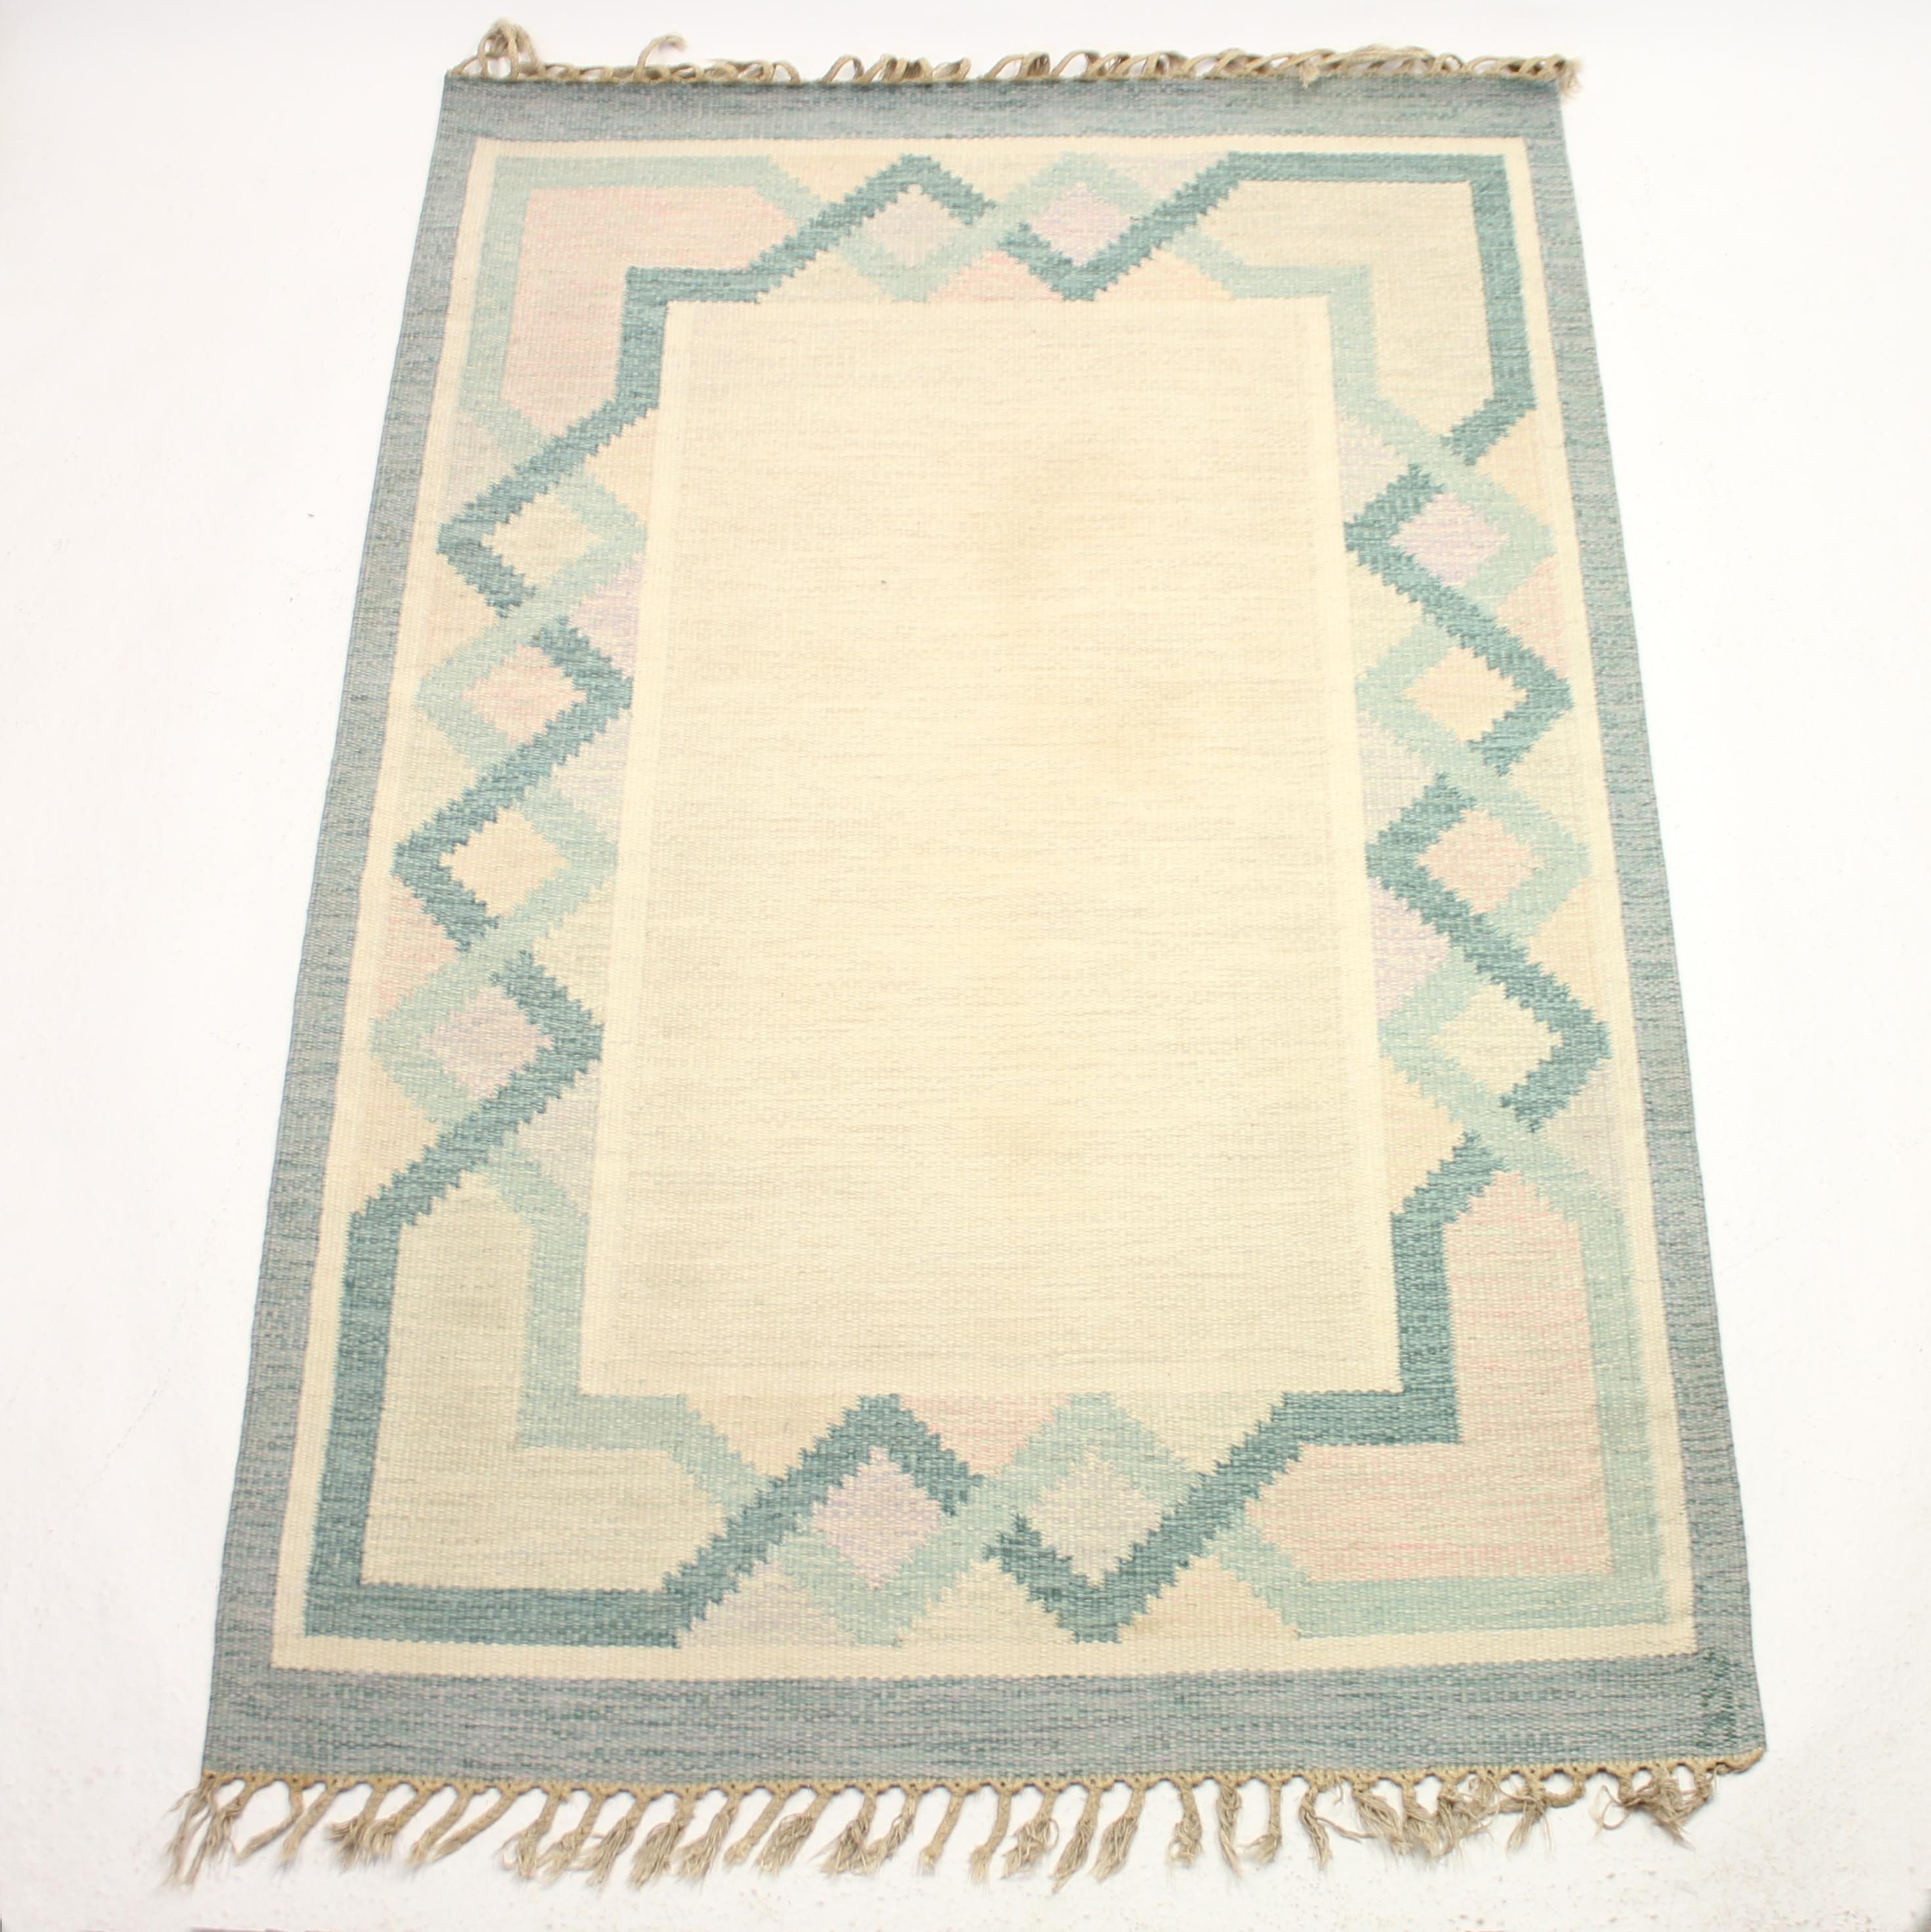 Swedish flat weave Röllakan carpet from the 1950s by Johanna Ångström. Marked Å (for Johanna Ångström) in the bottom right corner. Main colors are green and beige with a variety of patterns and shapes in pink, beige and green on a beige bottom/base.